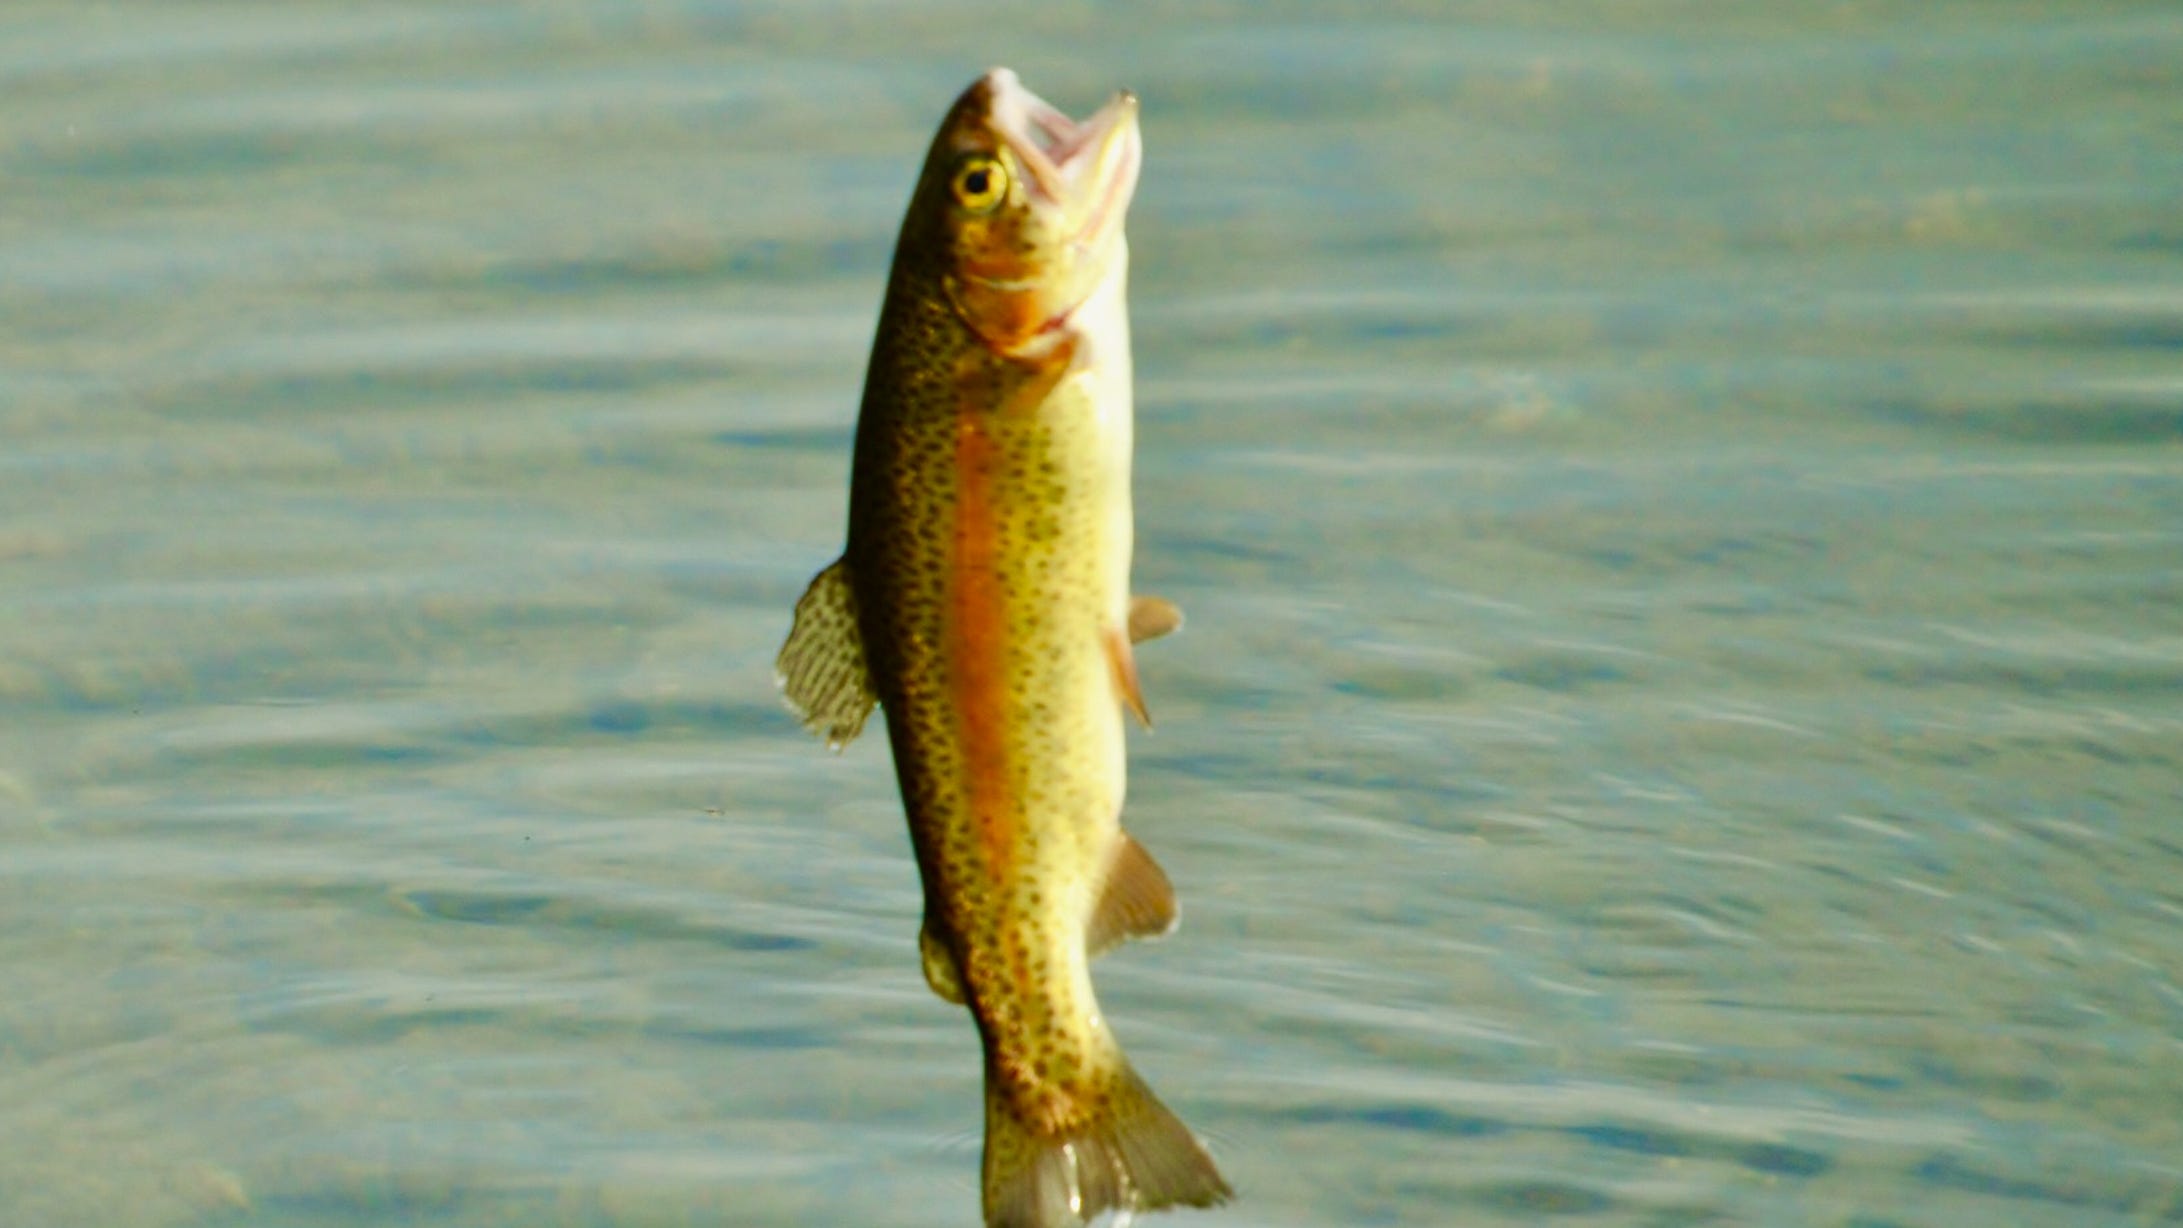 Pa. trout fishing 2020 season Quick guide to dates, limits & licenses